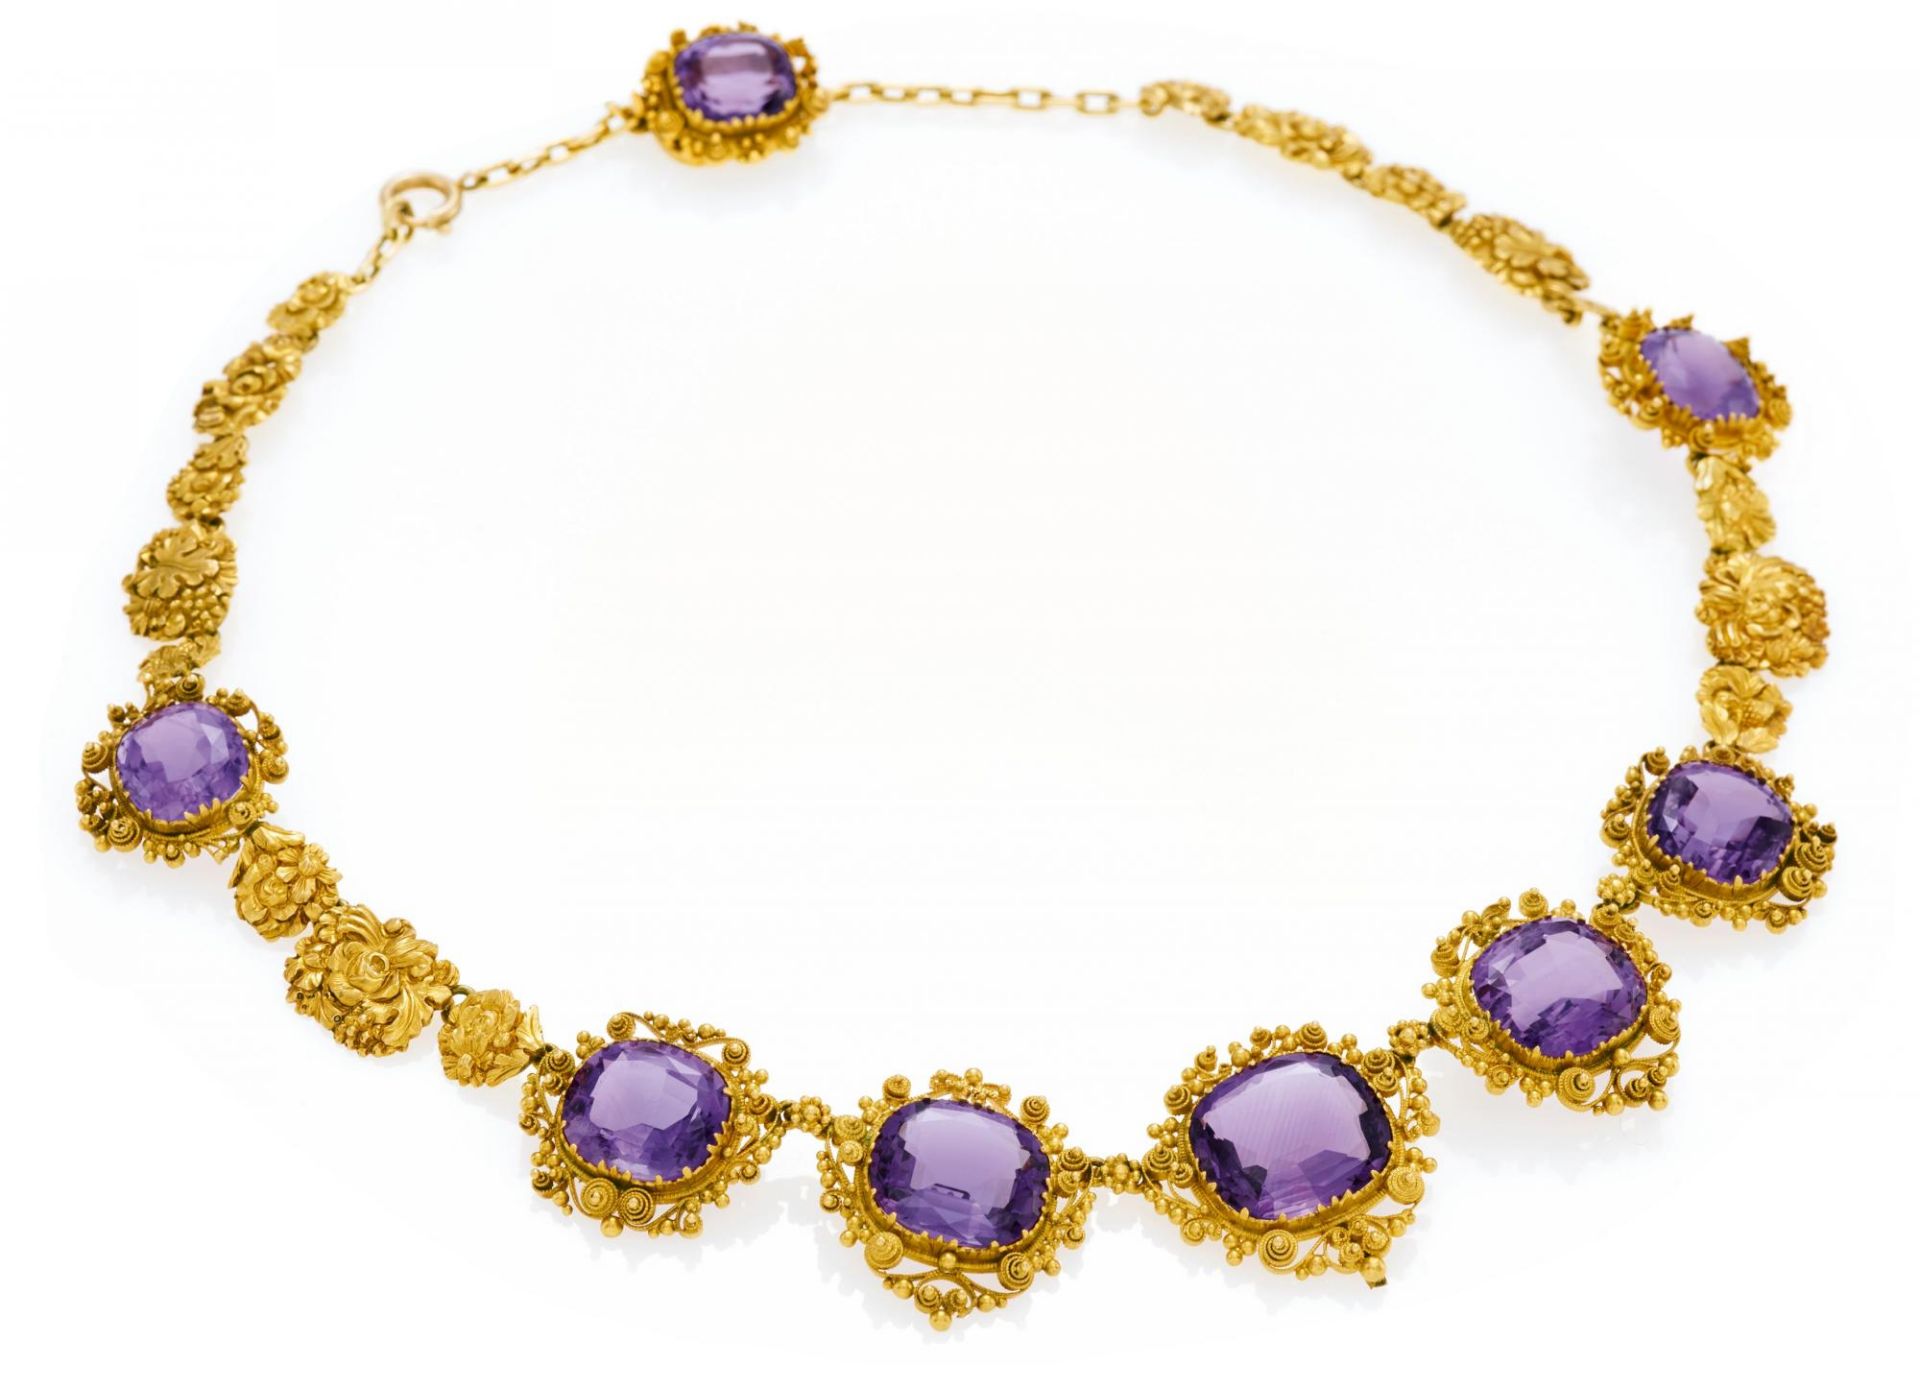 AMETHYST-NECKLACE. Origin: France. Material: 585/- yellow gold. Total Weight: ca. 60,0 g.